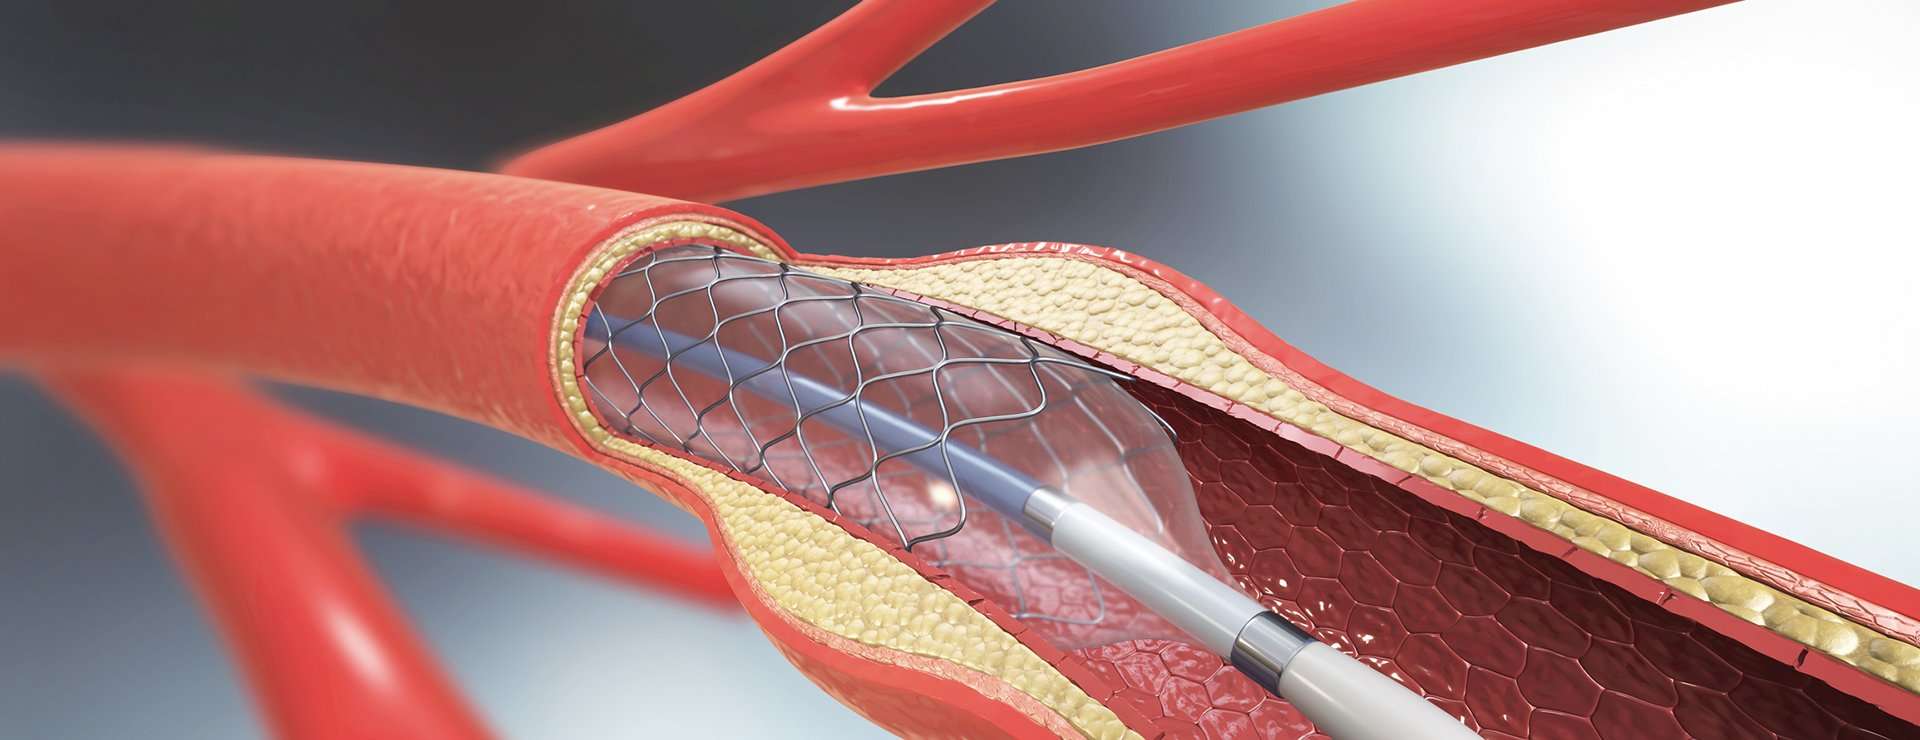 Angioplasty and Stent Placement for the Heart